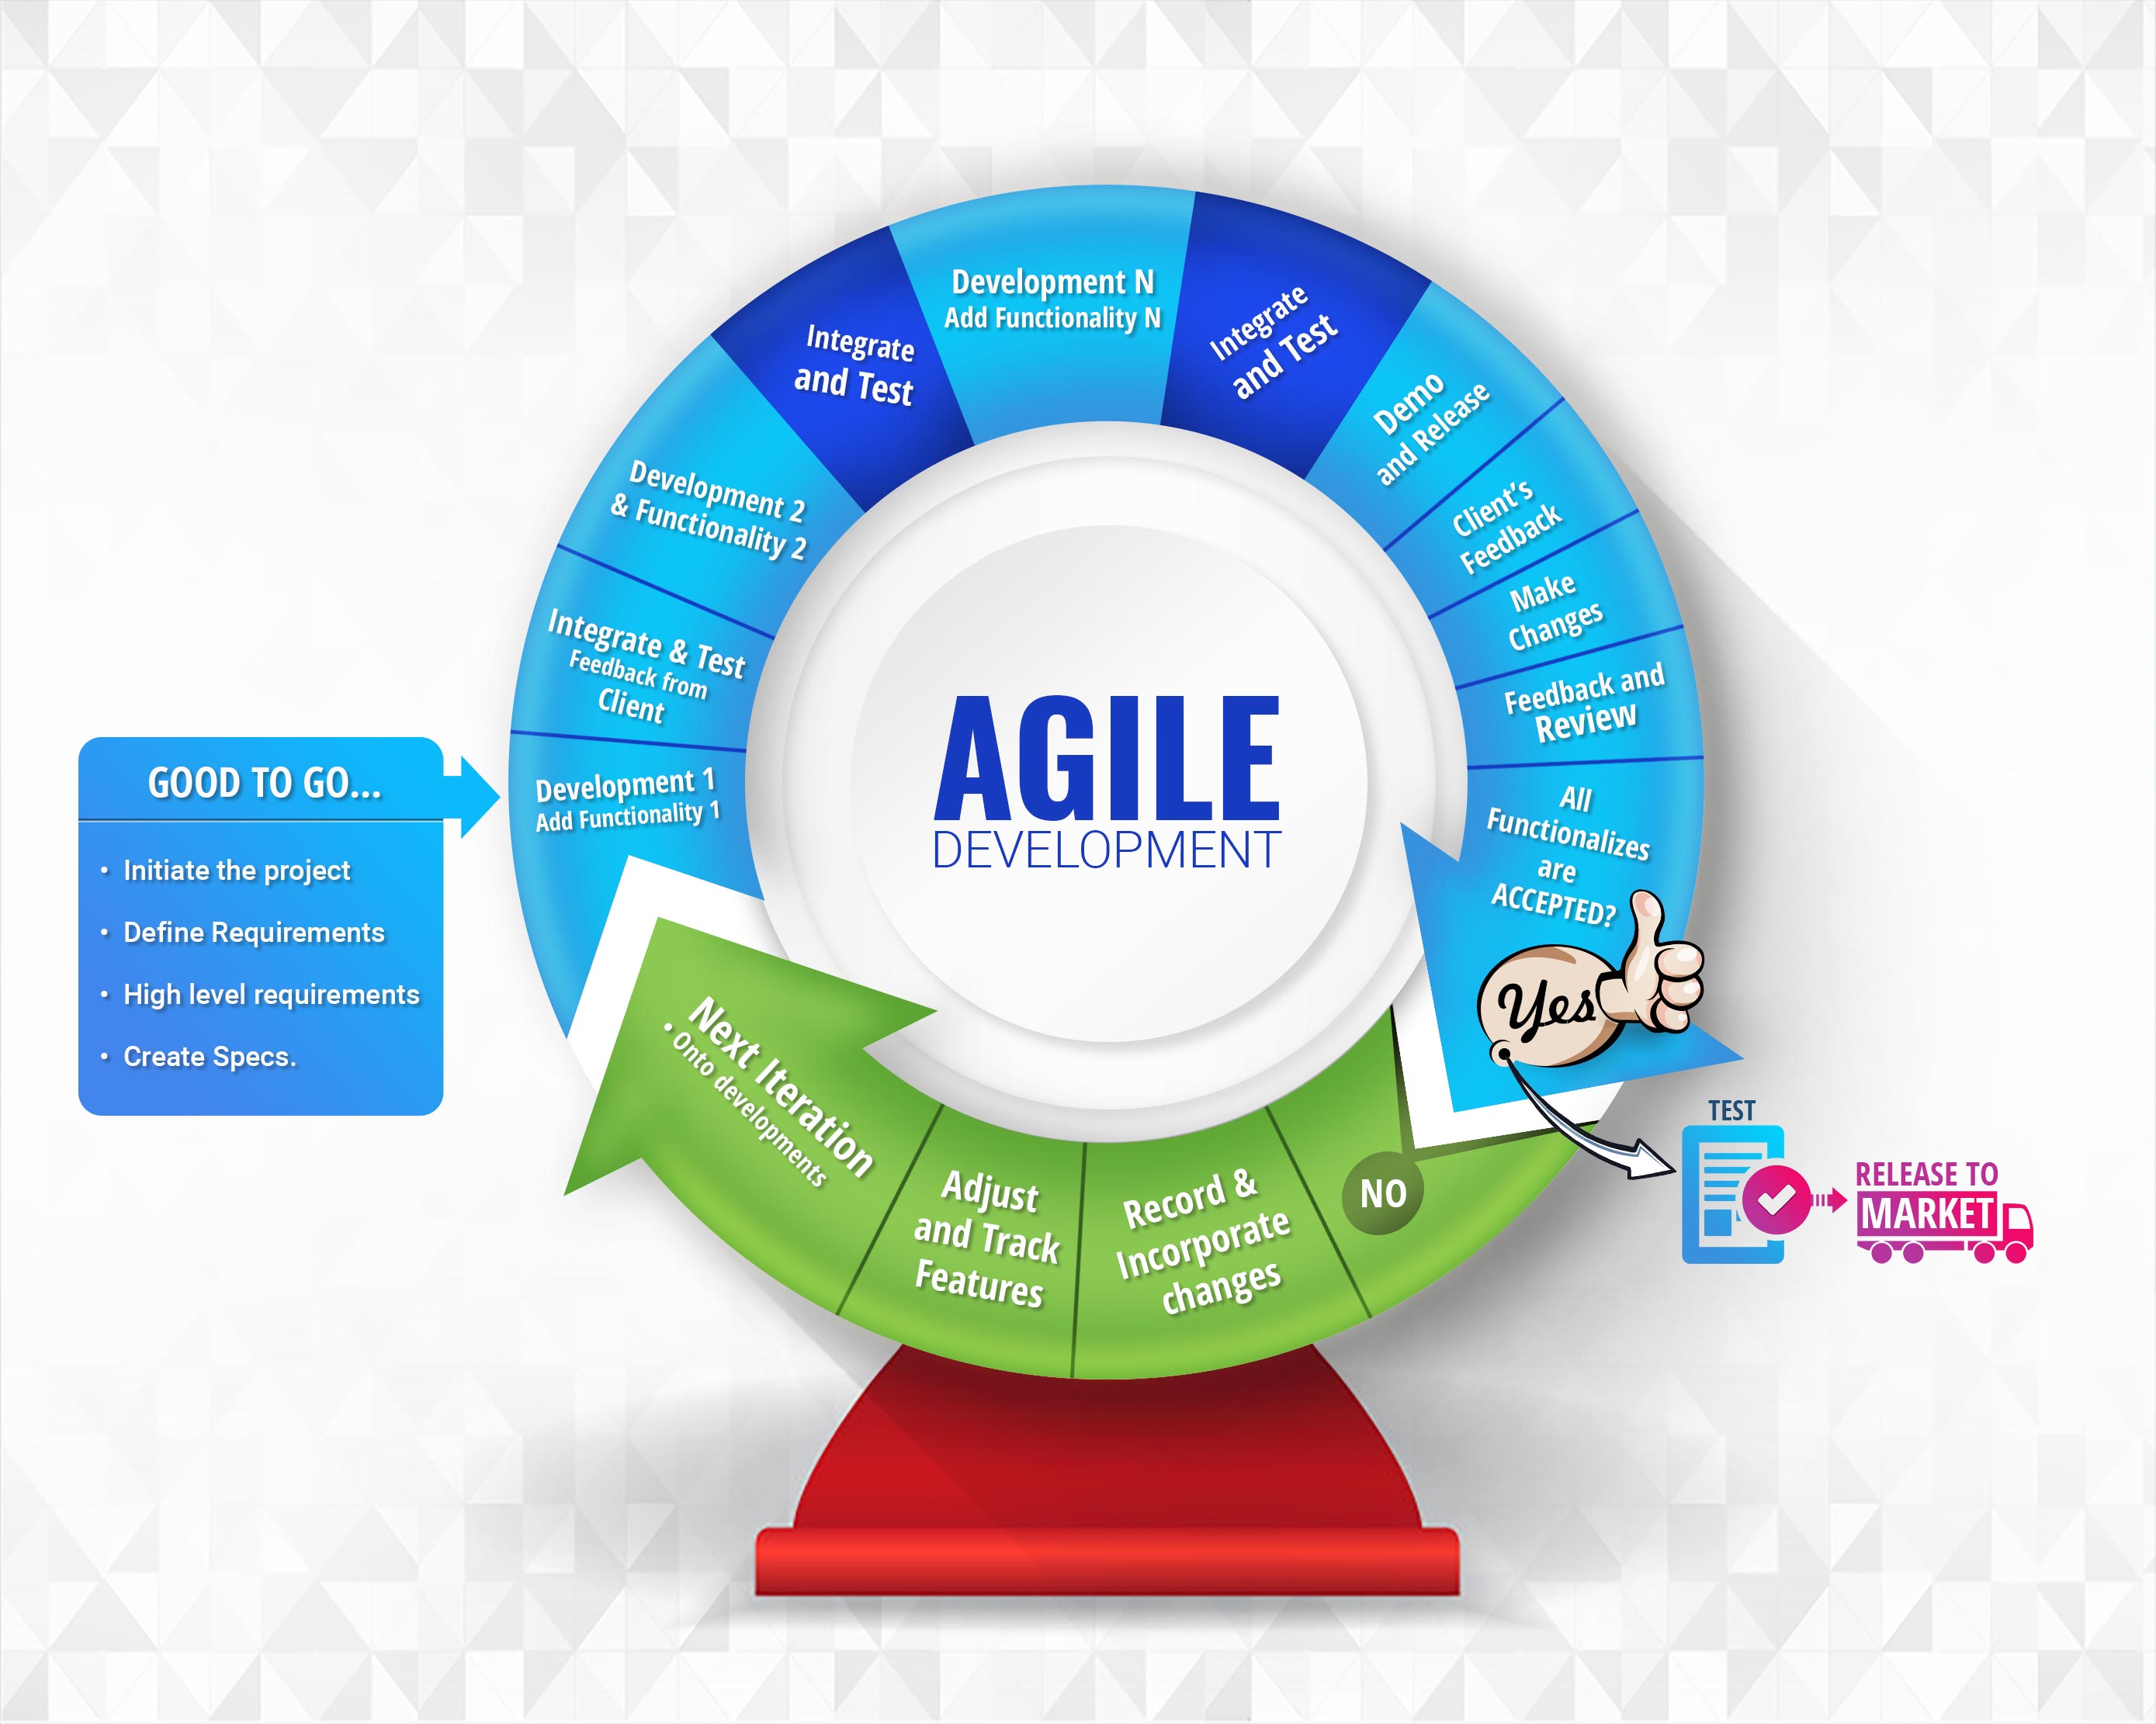 Agile Development To Expedite Custom Software Development. This is the latest methodology for an efficient development.